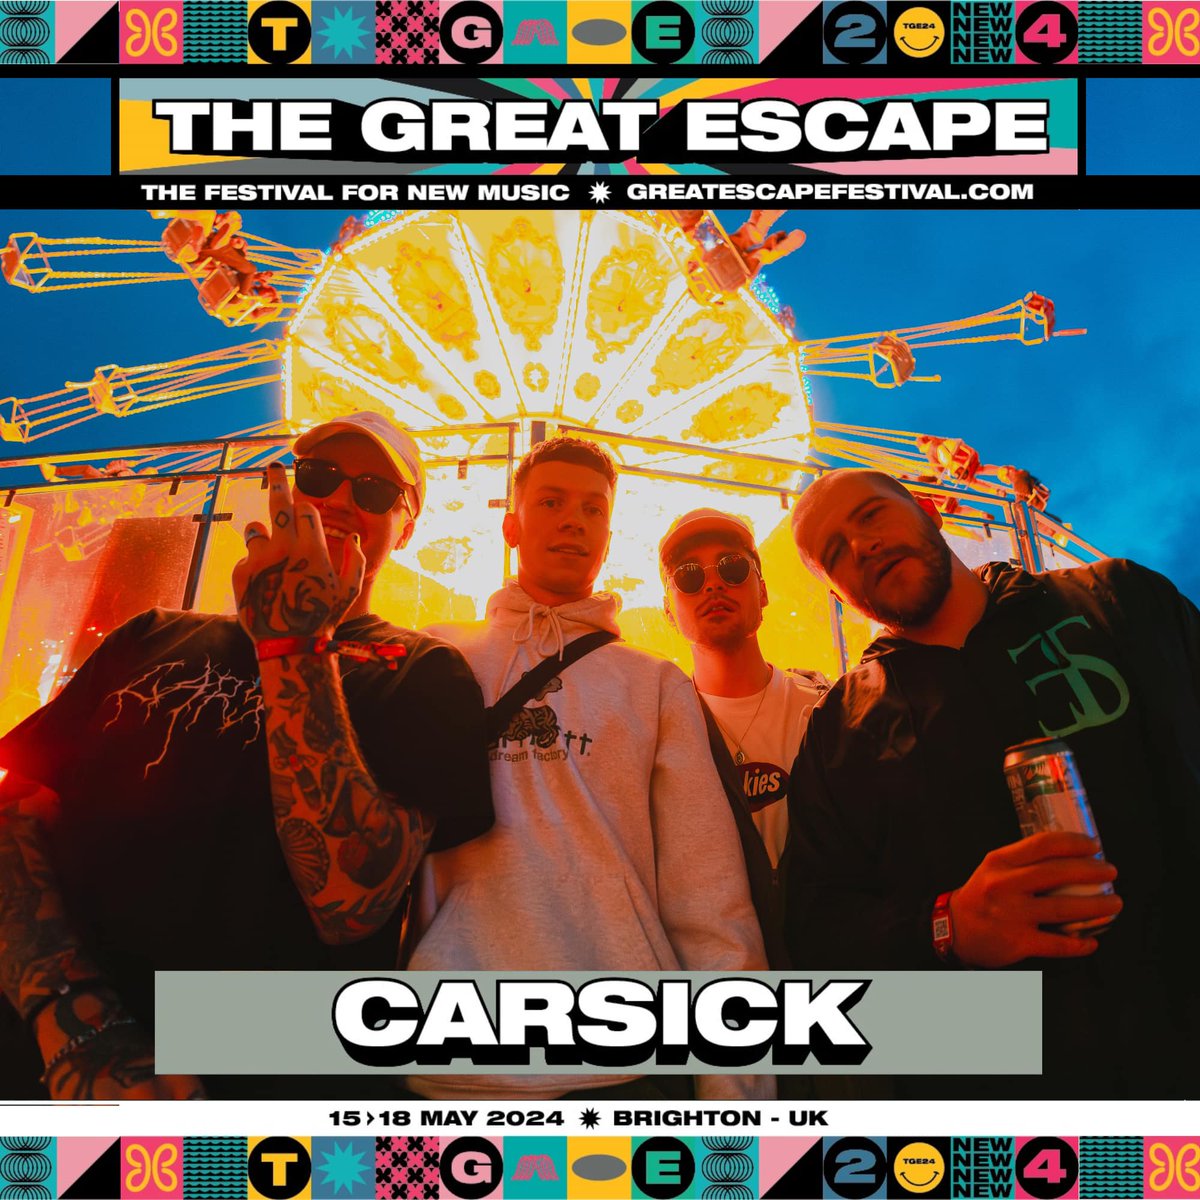 Alcopop! reppin' at @thegreatescape - @cherymofficial @M_cramps @carsickofficial >>> This is gonna' be HUGE!!!! greatescapefestival.com/buy-festival-t… Get your tickets and we'll see you at the front. Hooch on you, right? xx